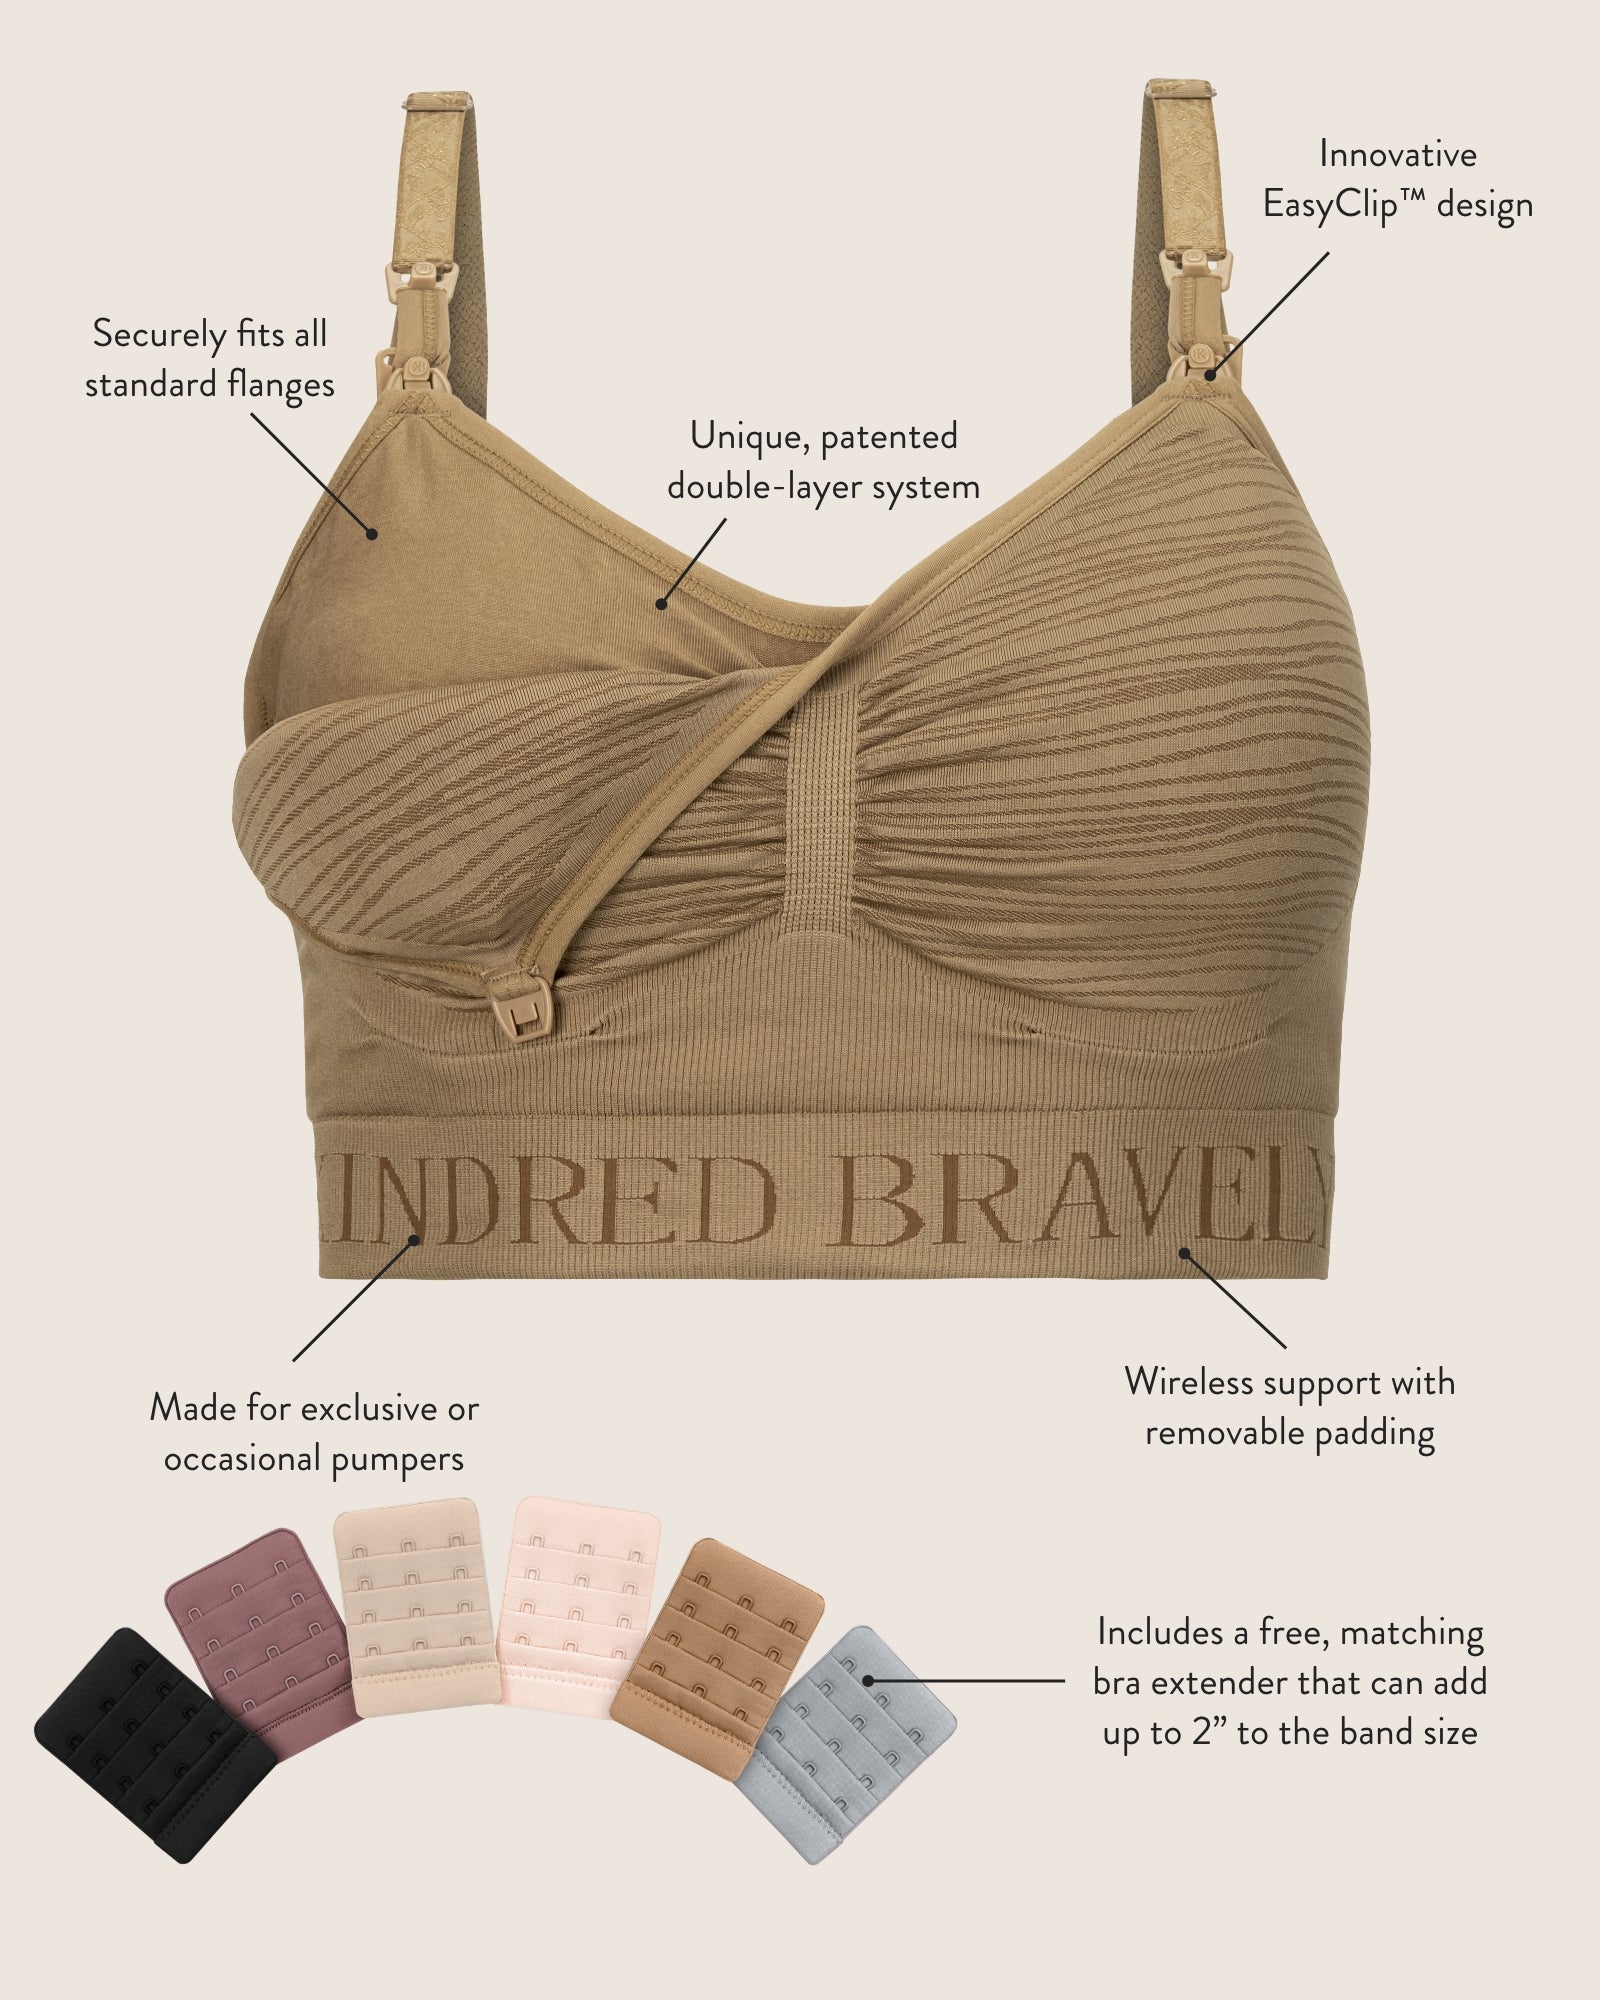 Wholesale bra cup size chart picture For All Your Intimate Needs 